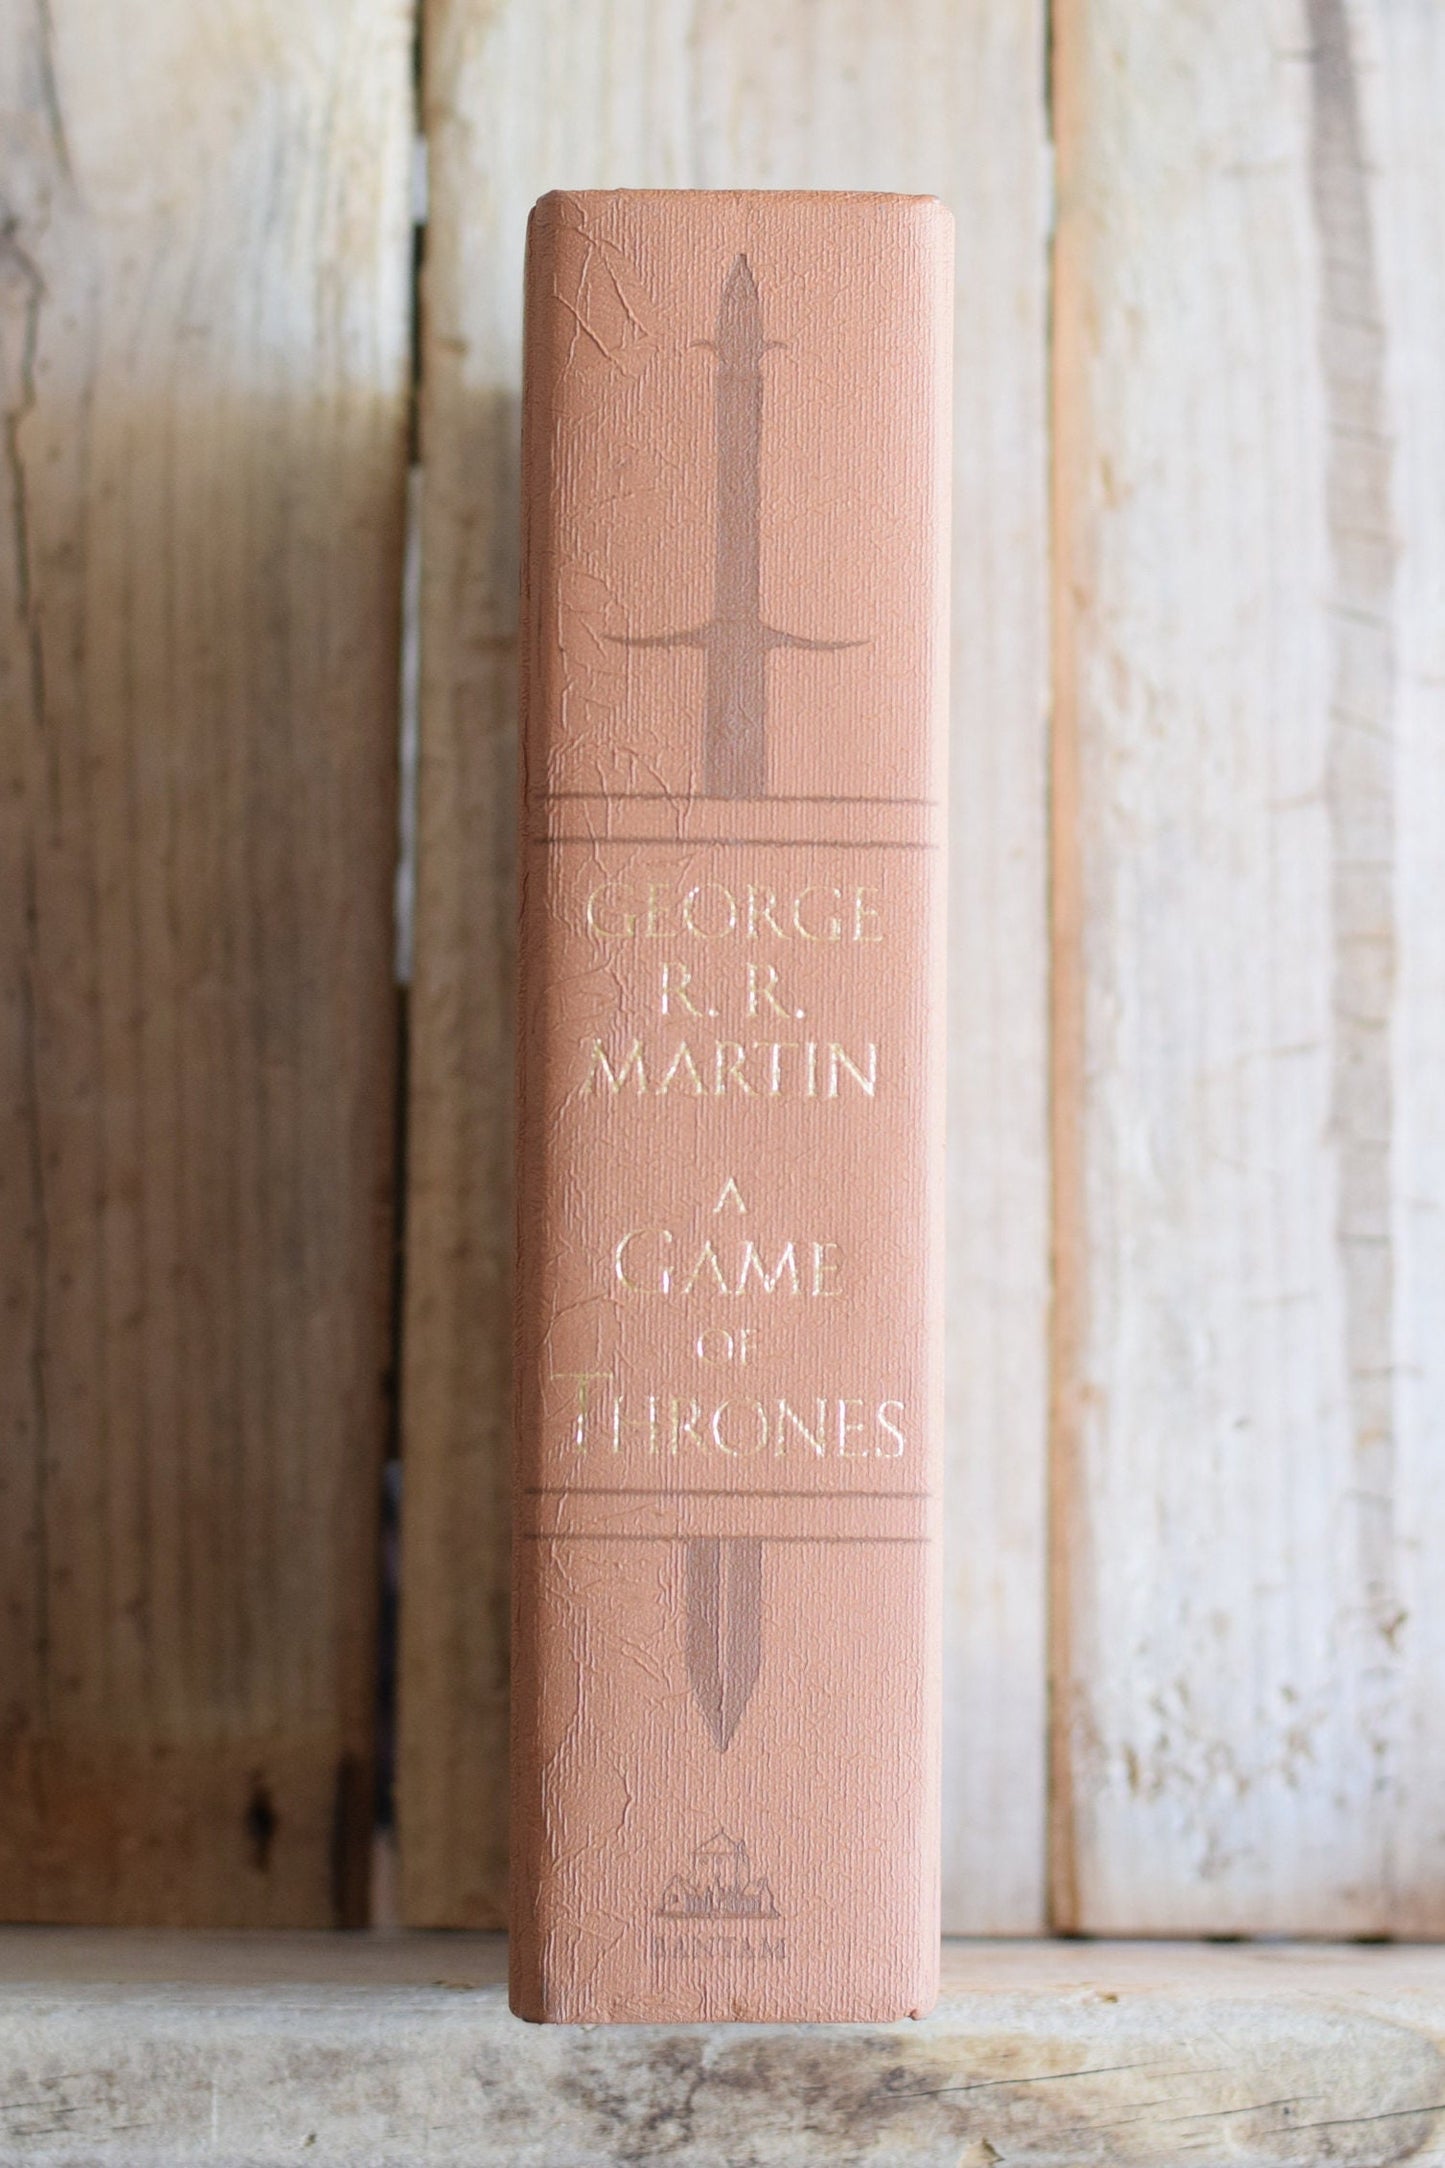 Fantasy Hardback Novel: George R R Martin - A Game of Thrones 20th Anniversary Illustrated Edition FIRST PRINTING